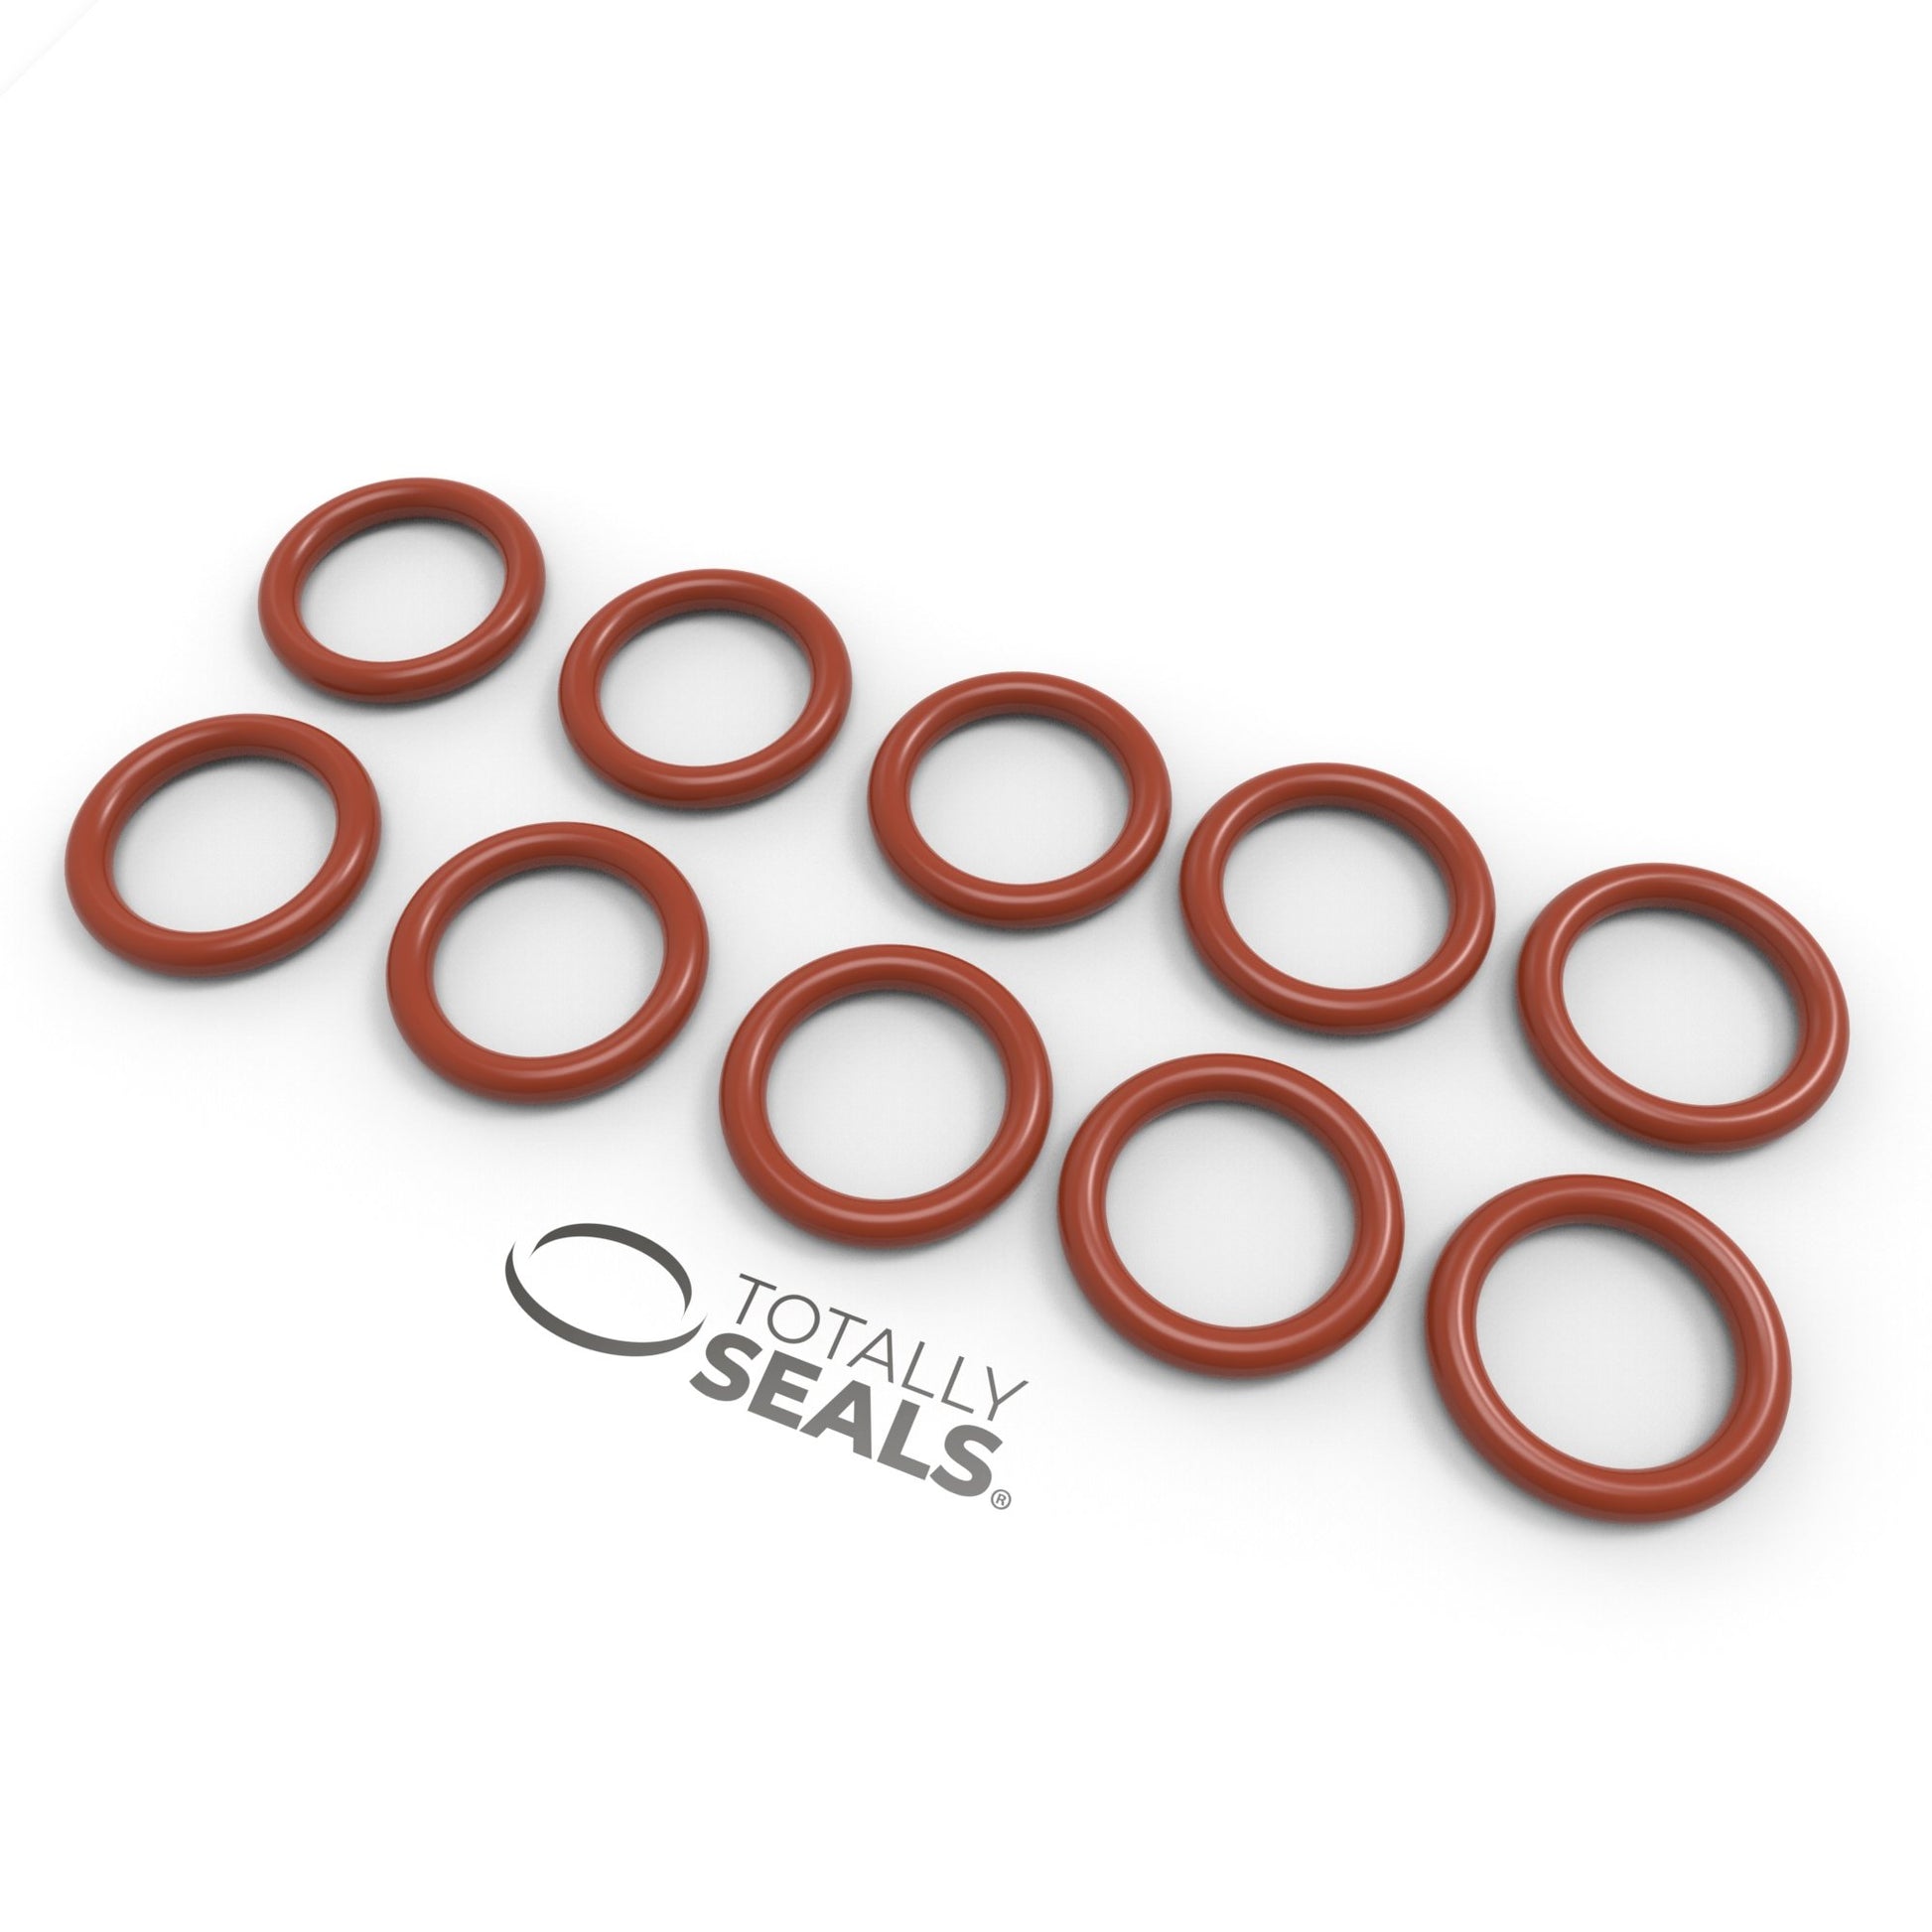 11mm x 2mm (15mm OD) Silicone O-Rings - Totally Seals®